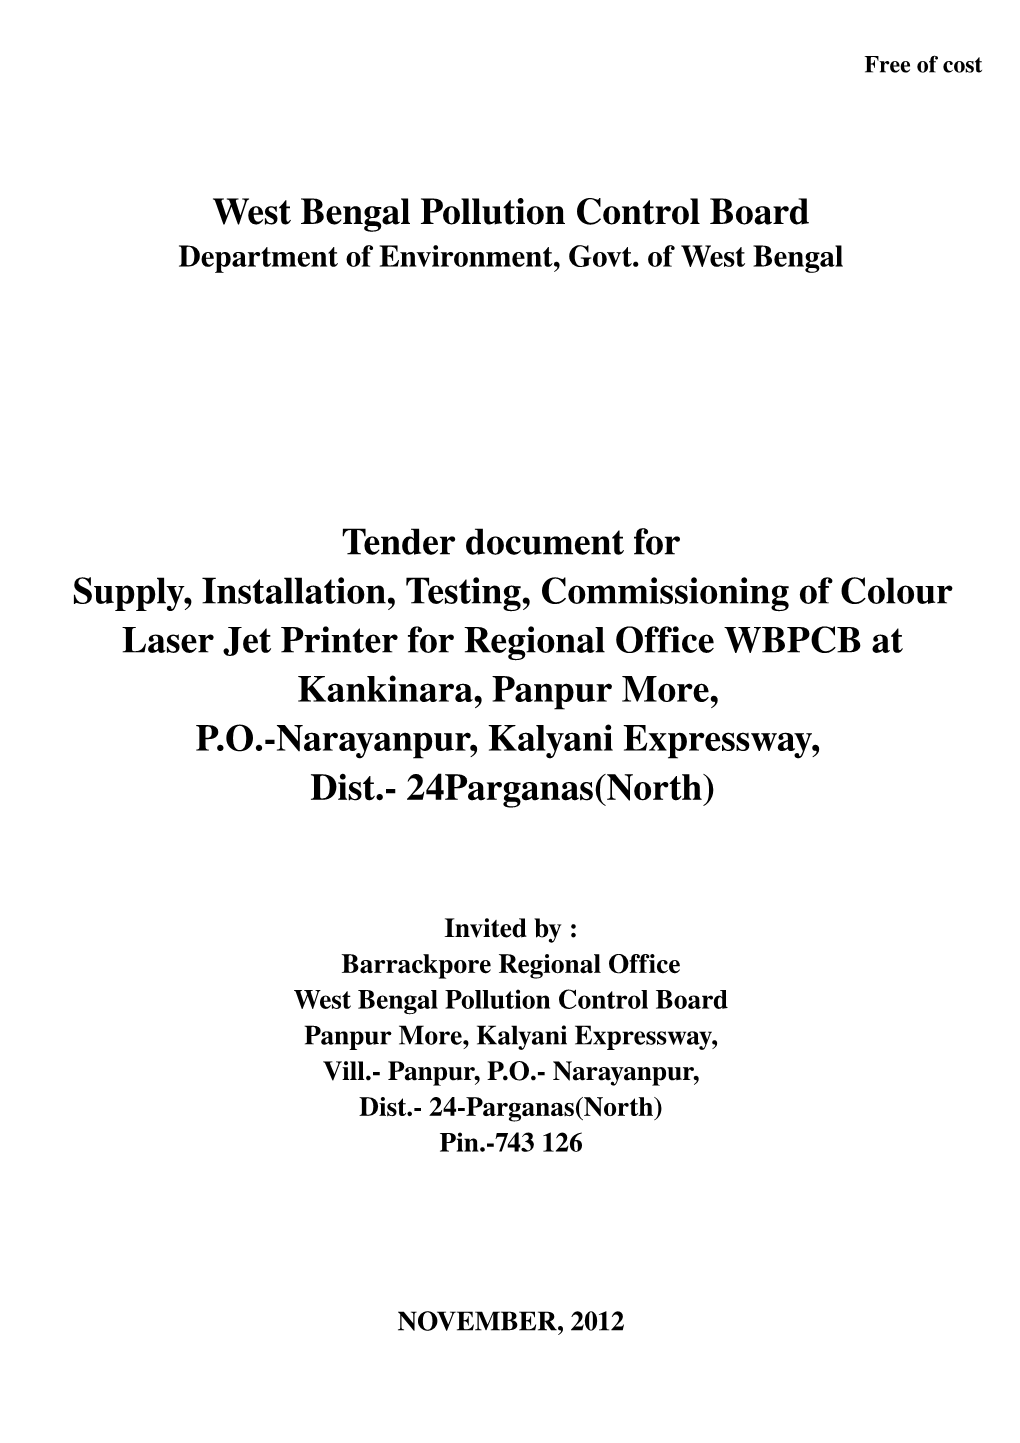 West Bengal Pollution Control Board Tender Document for Supply